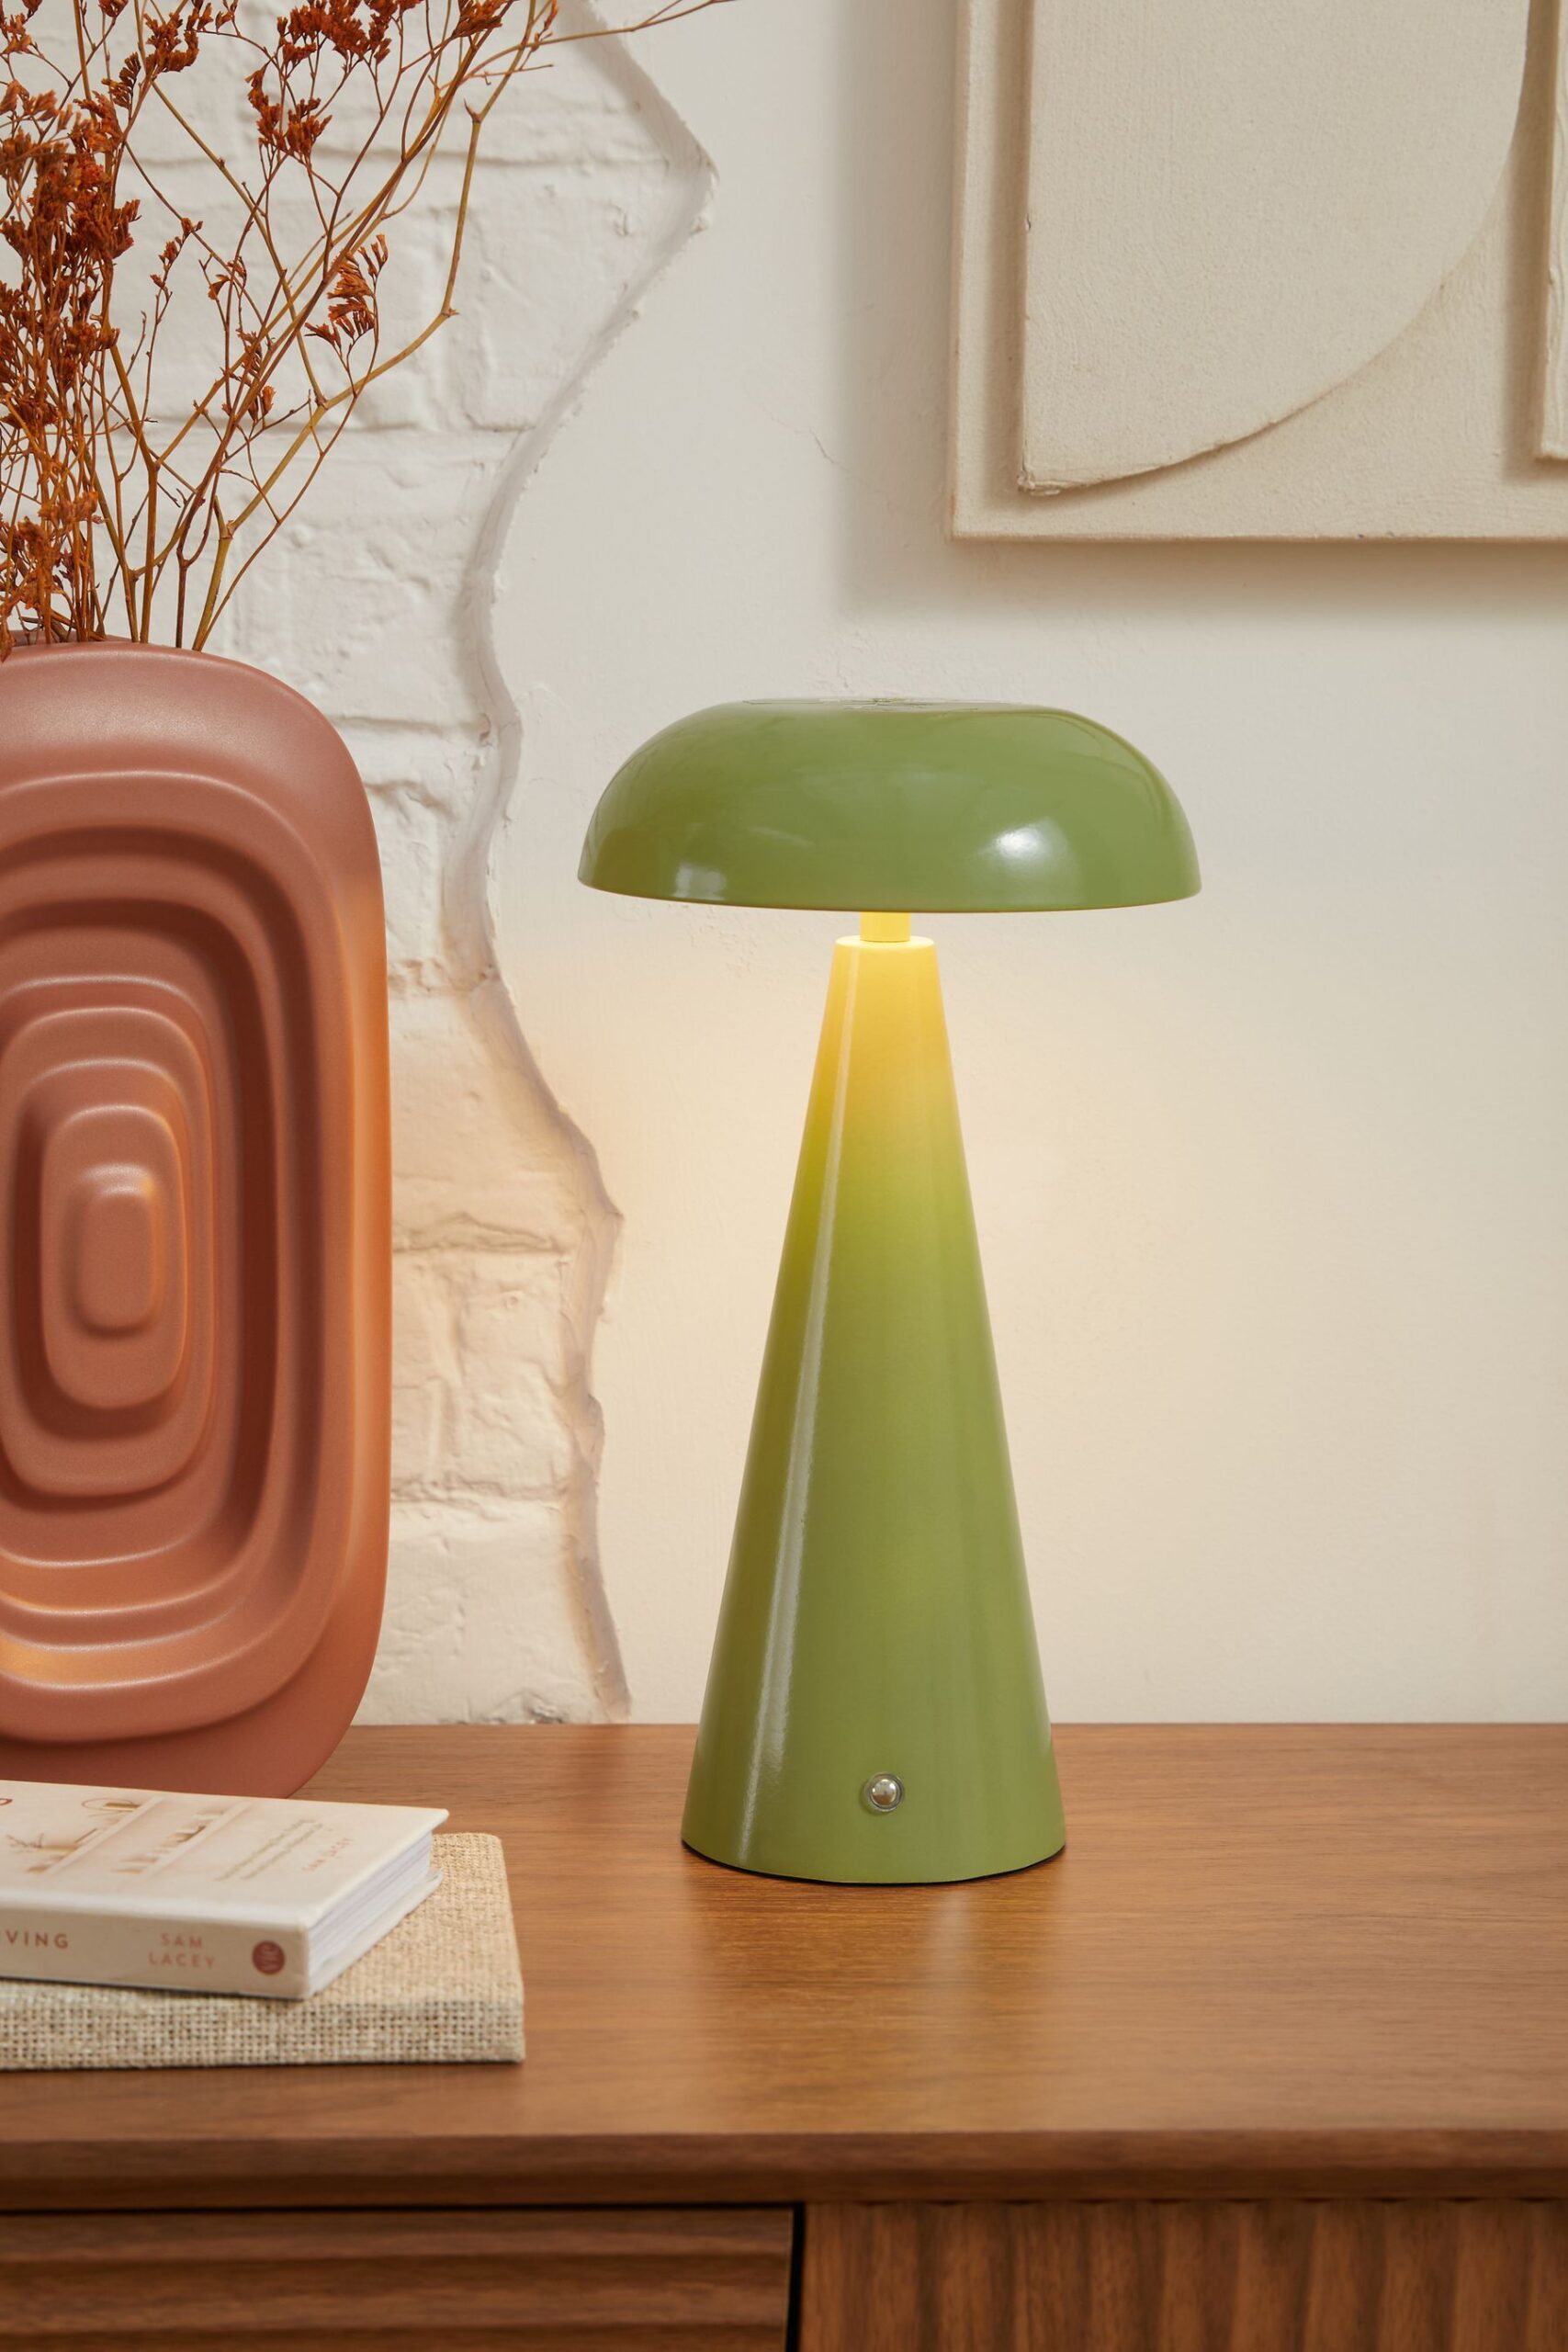 Online Lamps : Discover the Best Selection of Stylish Online Lamps for Every Room in Your Home